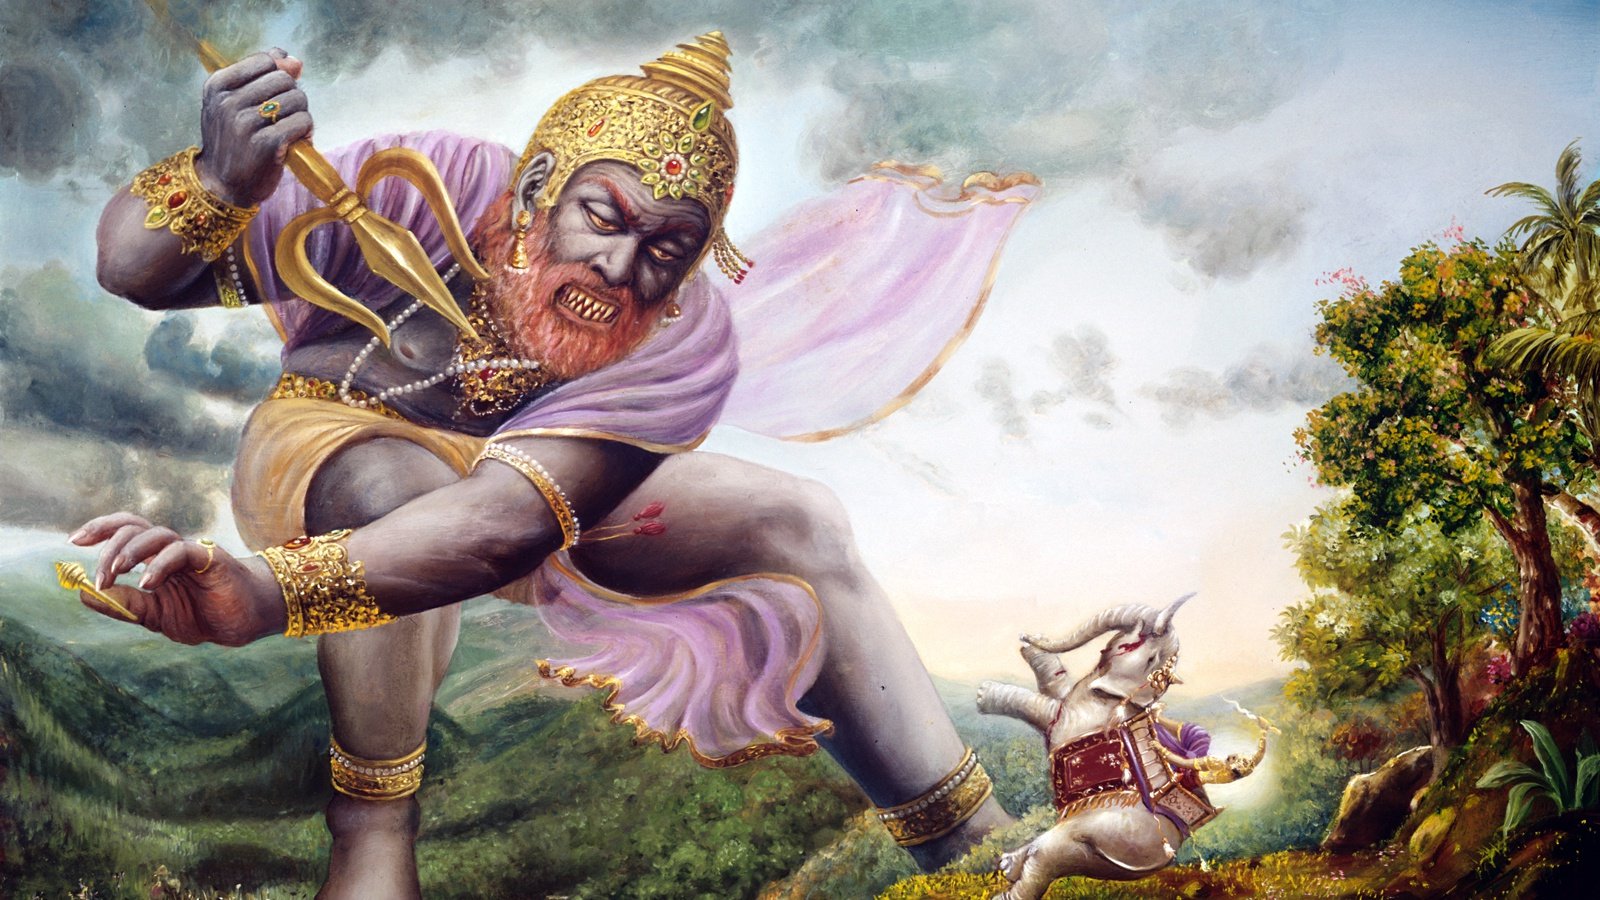 Why is Lord Indra said to be the king of the gods? Who are Lord Vishnu and Lord Shiva then?